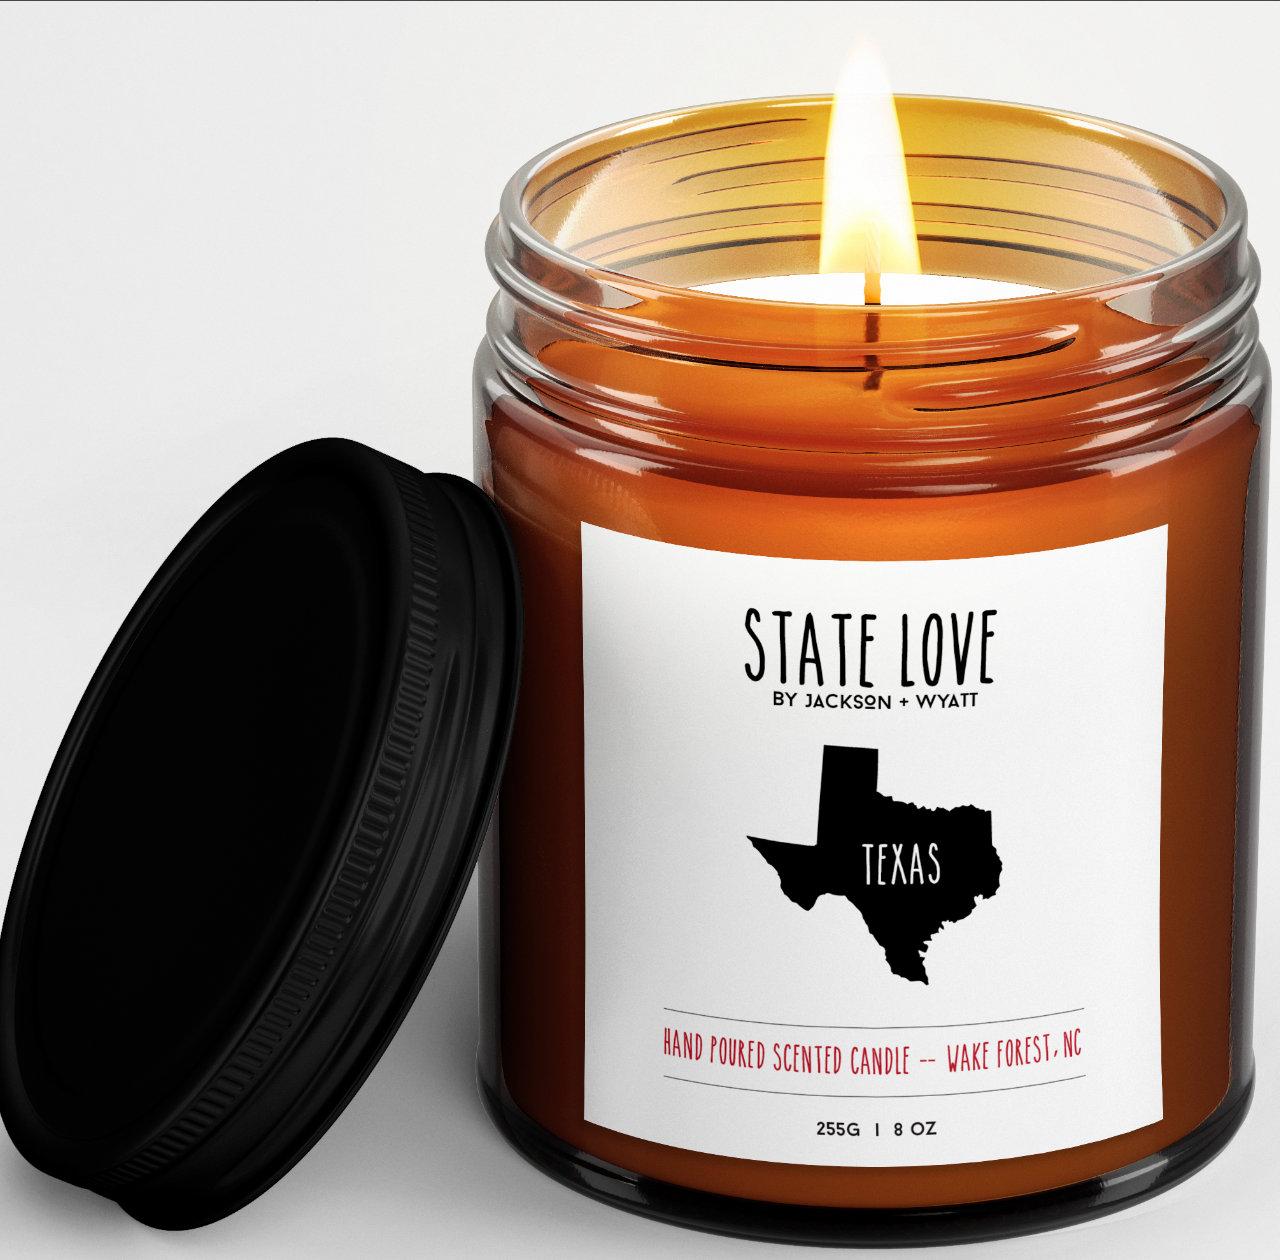 Texas Candle - Flannel Scent